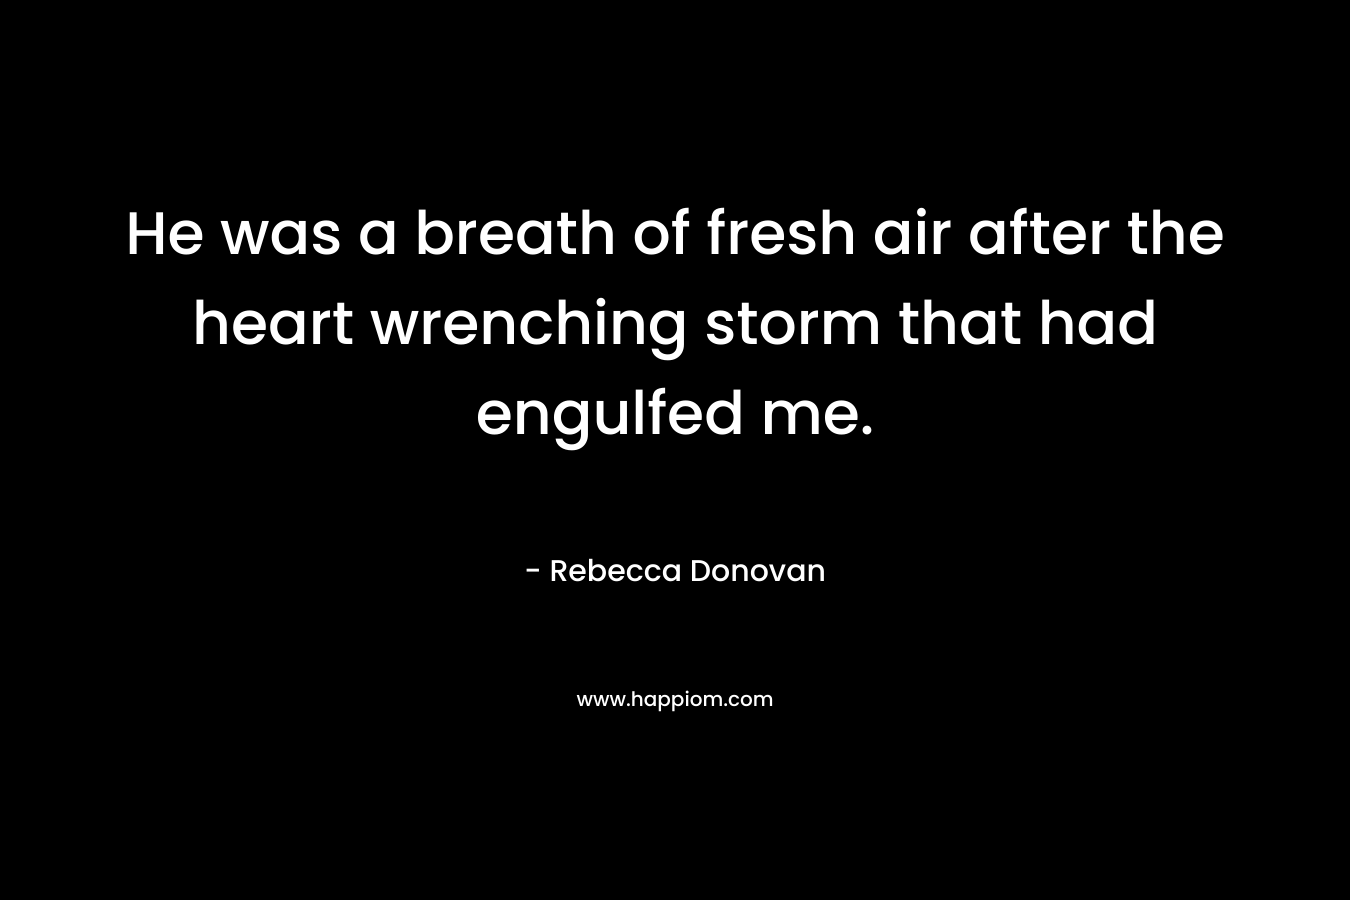 He was a breath of fresh air after the heart wrenching storm that had engulfed me.